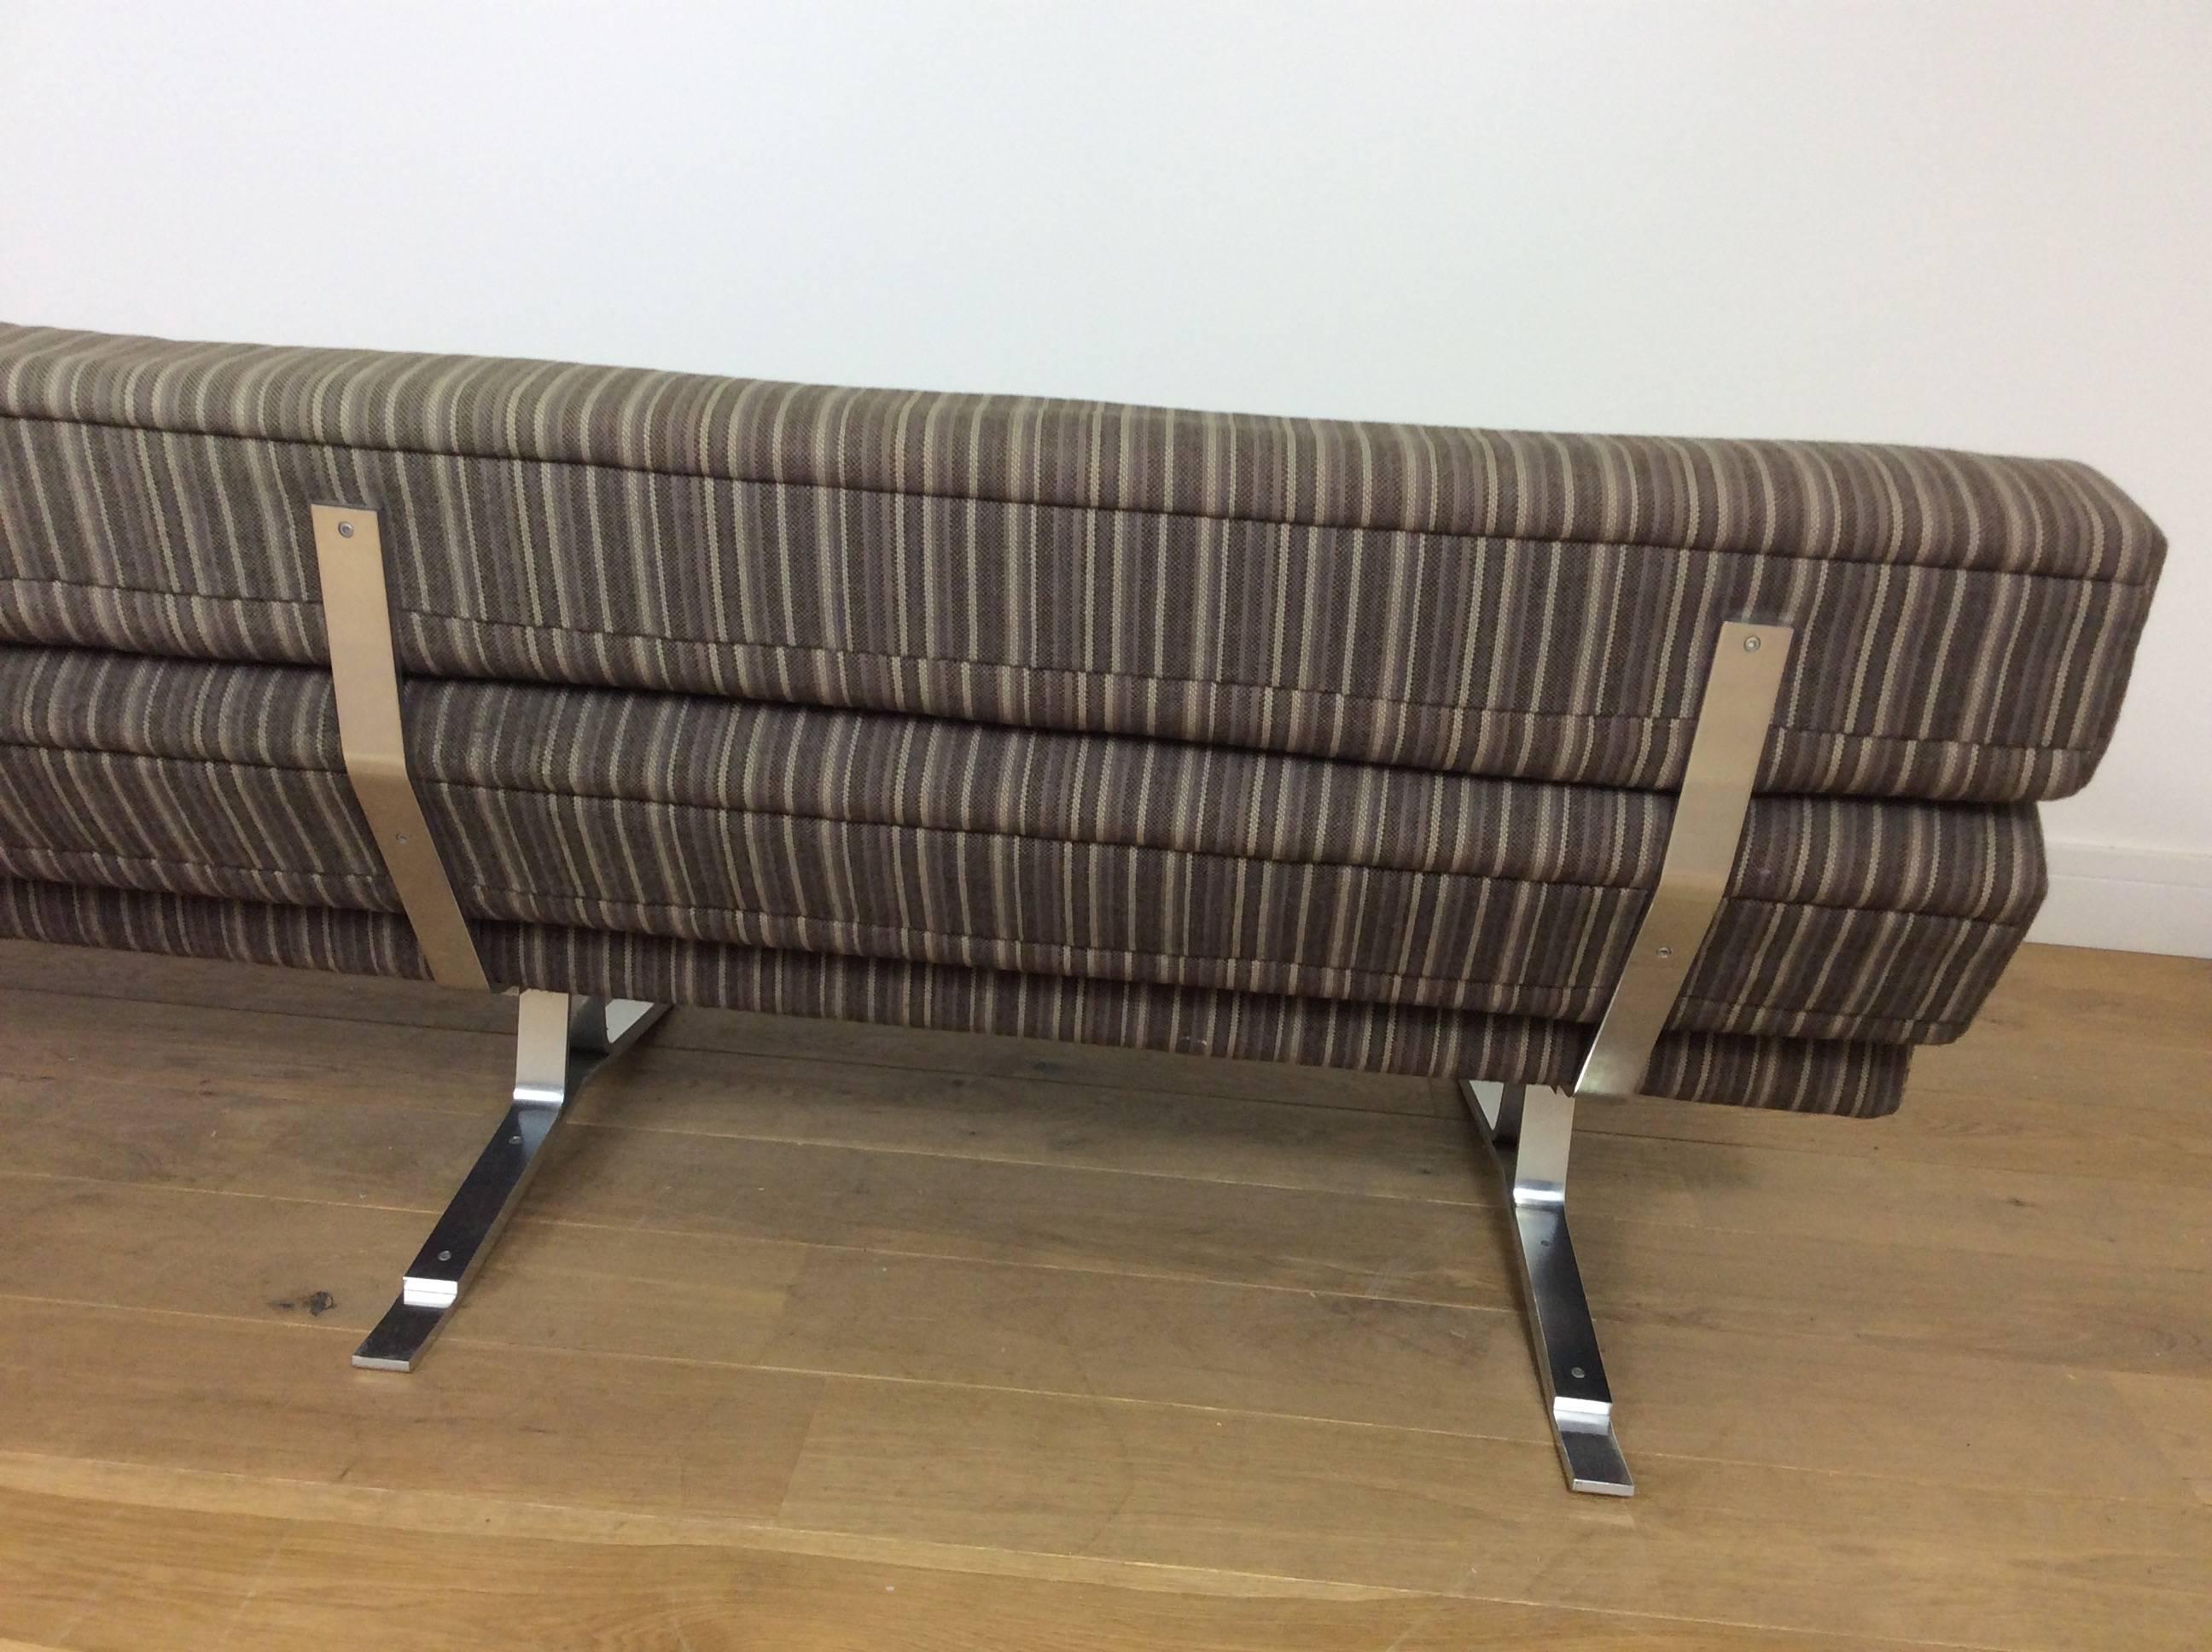 Midcentury Sofa by William Plunkett Model, WP01 For Sale 2